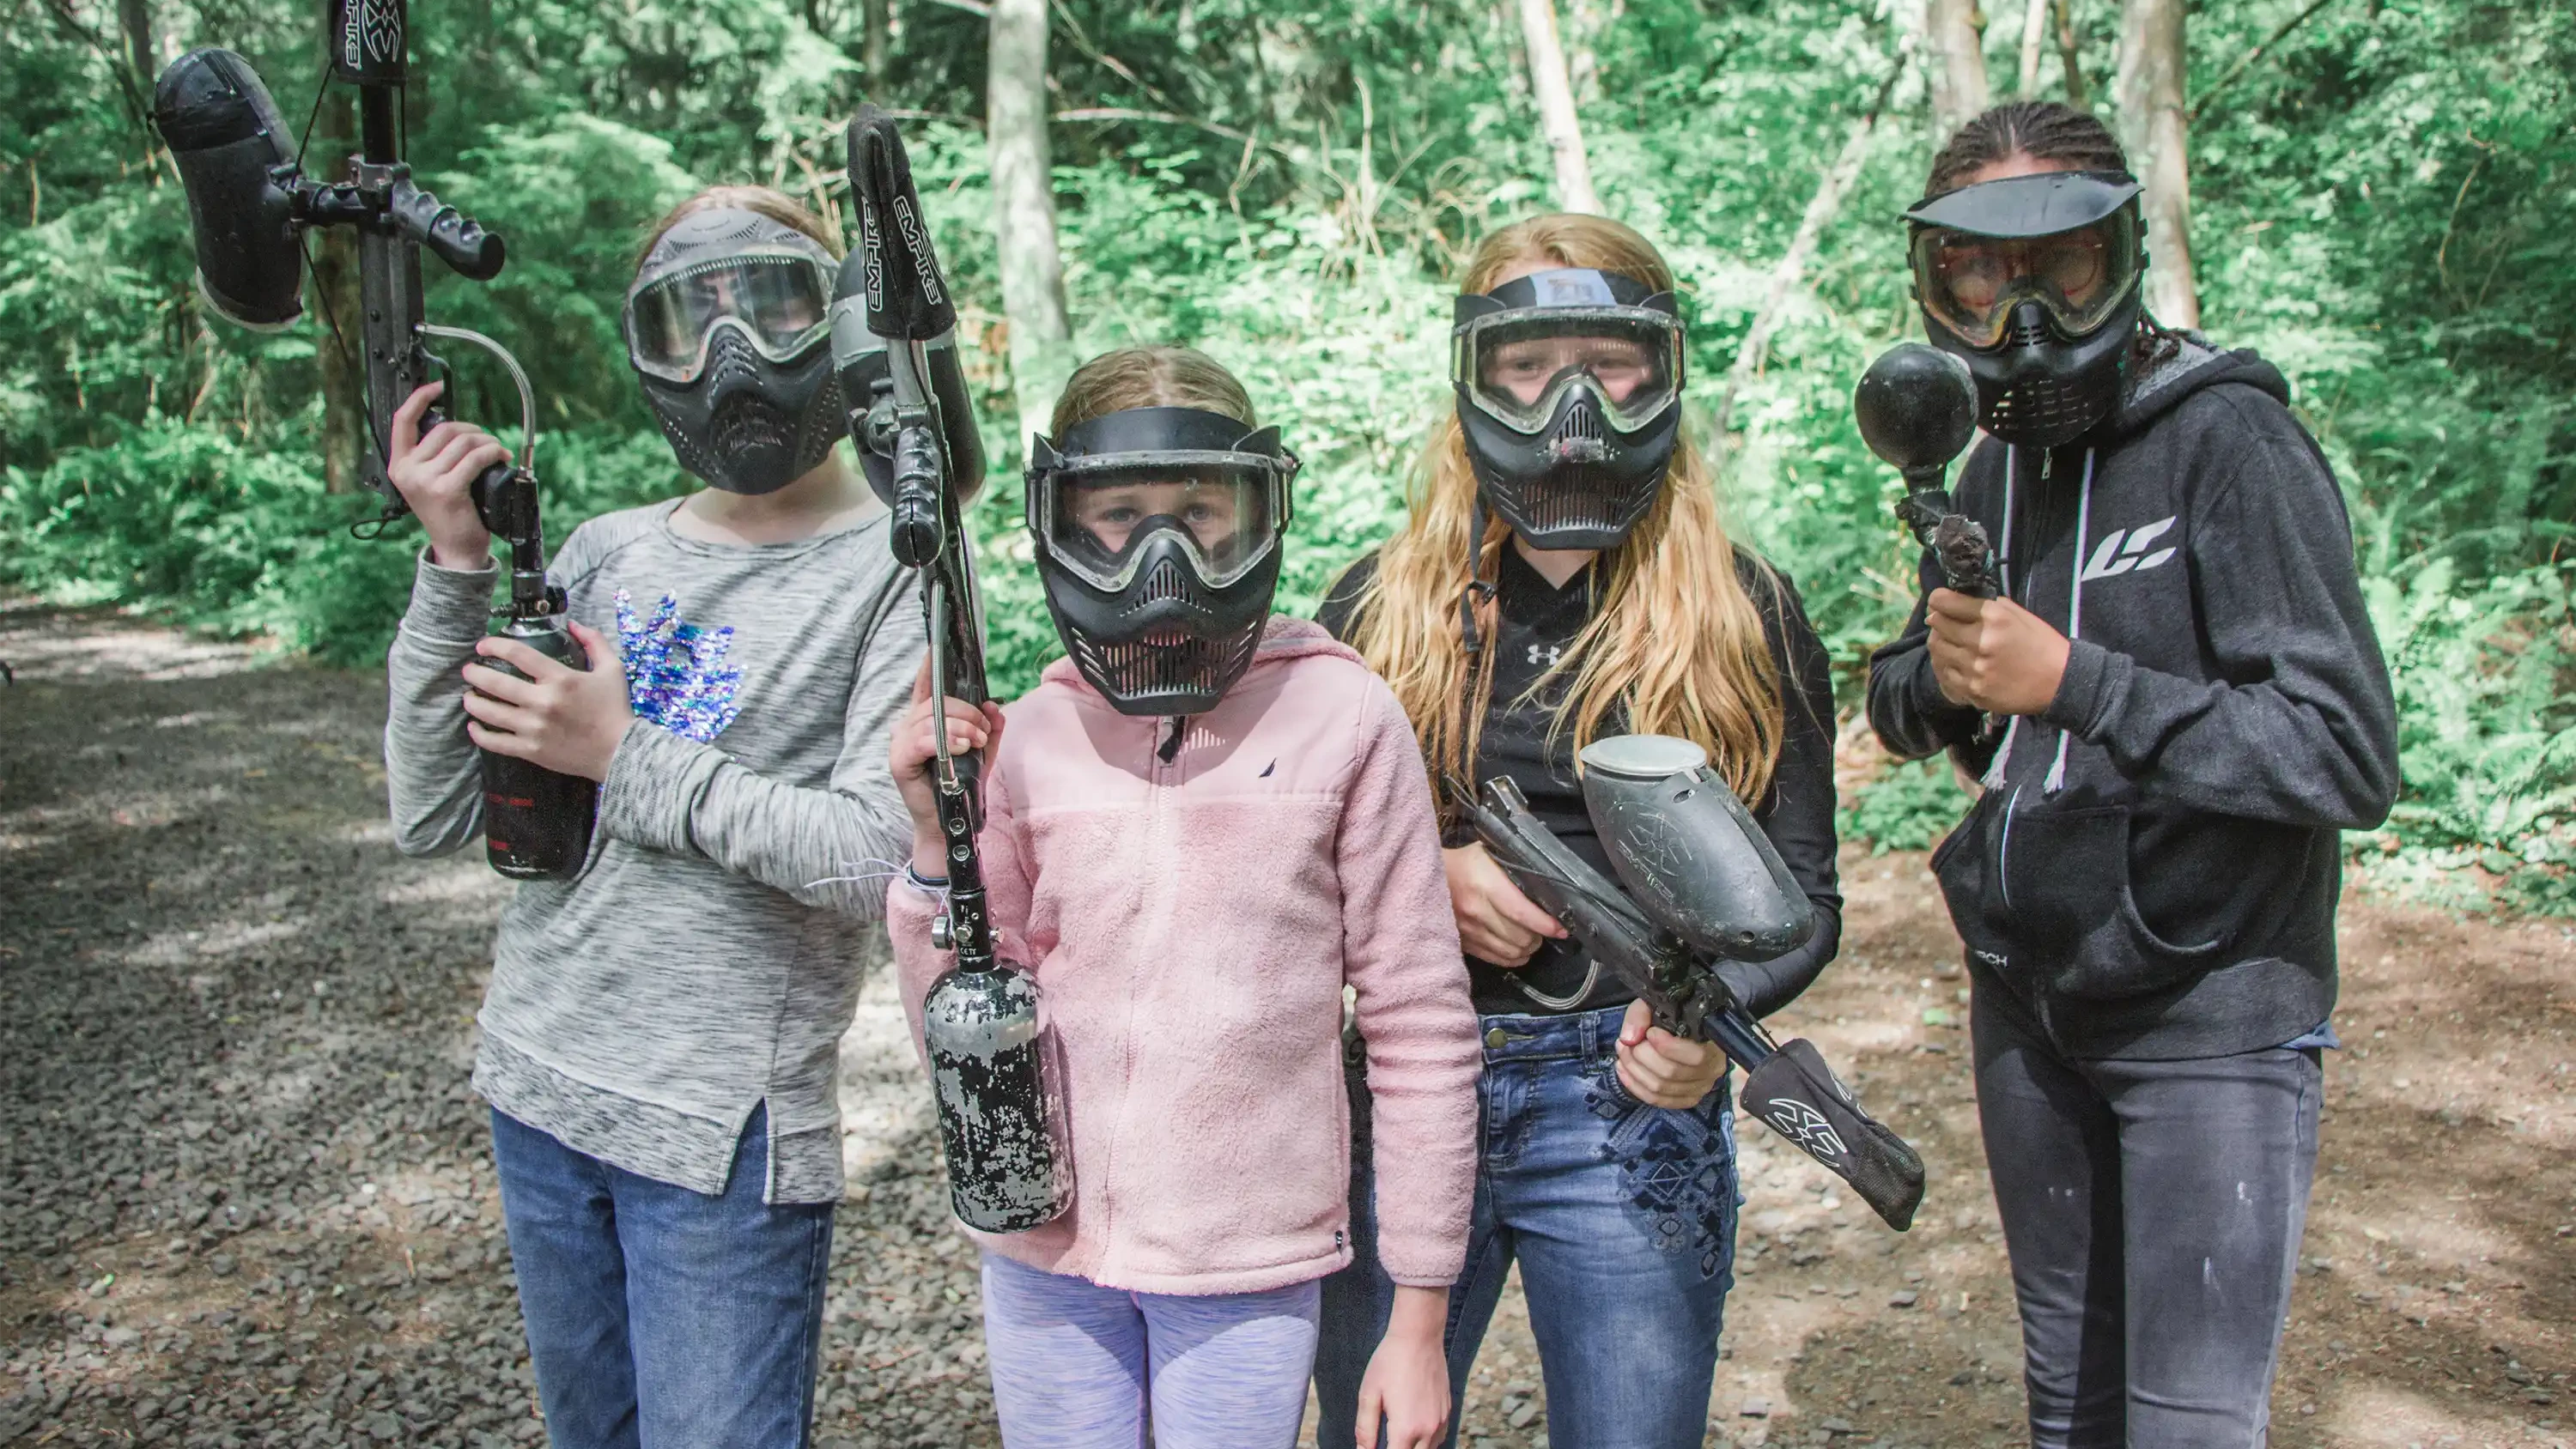 crista-camps-day-camp-campers-ready-for-paintball-hero-image.webp